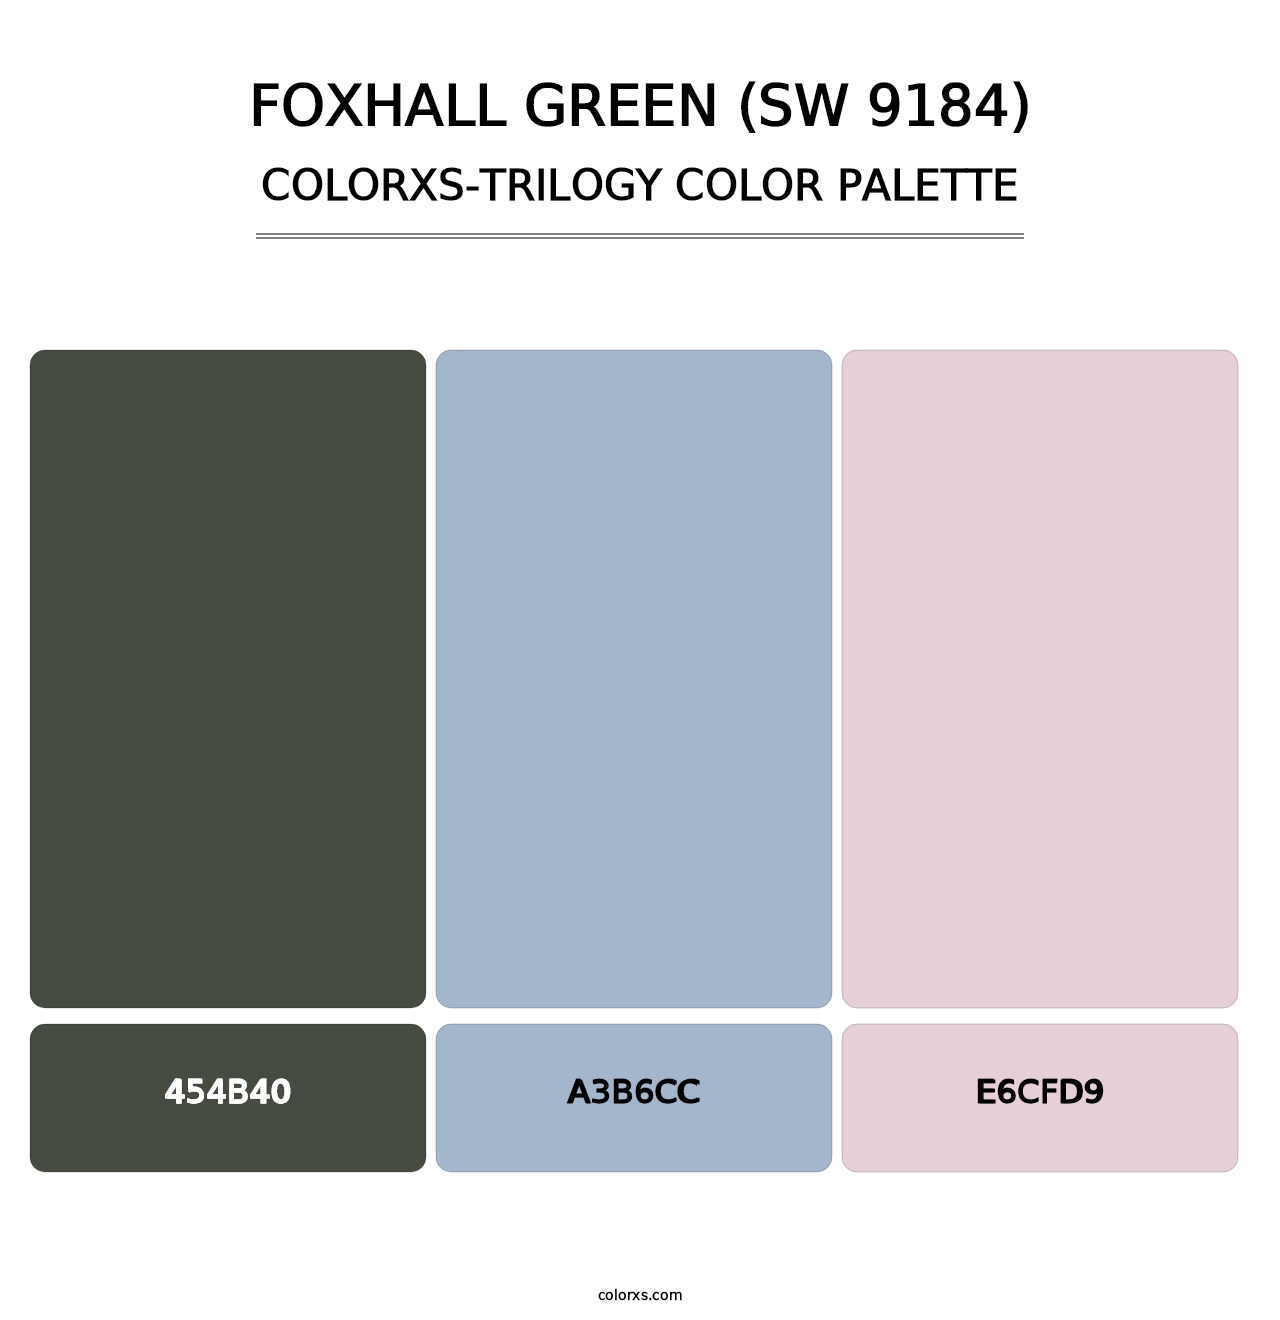 Foxhall Green (SW 9184) - Colorxs Trilogy Palette